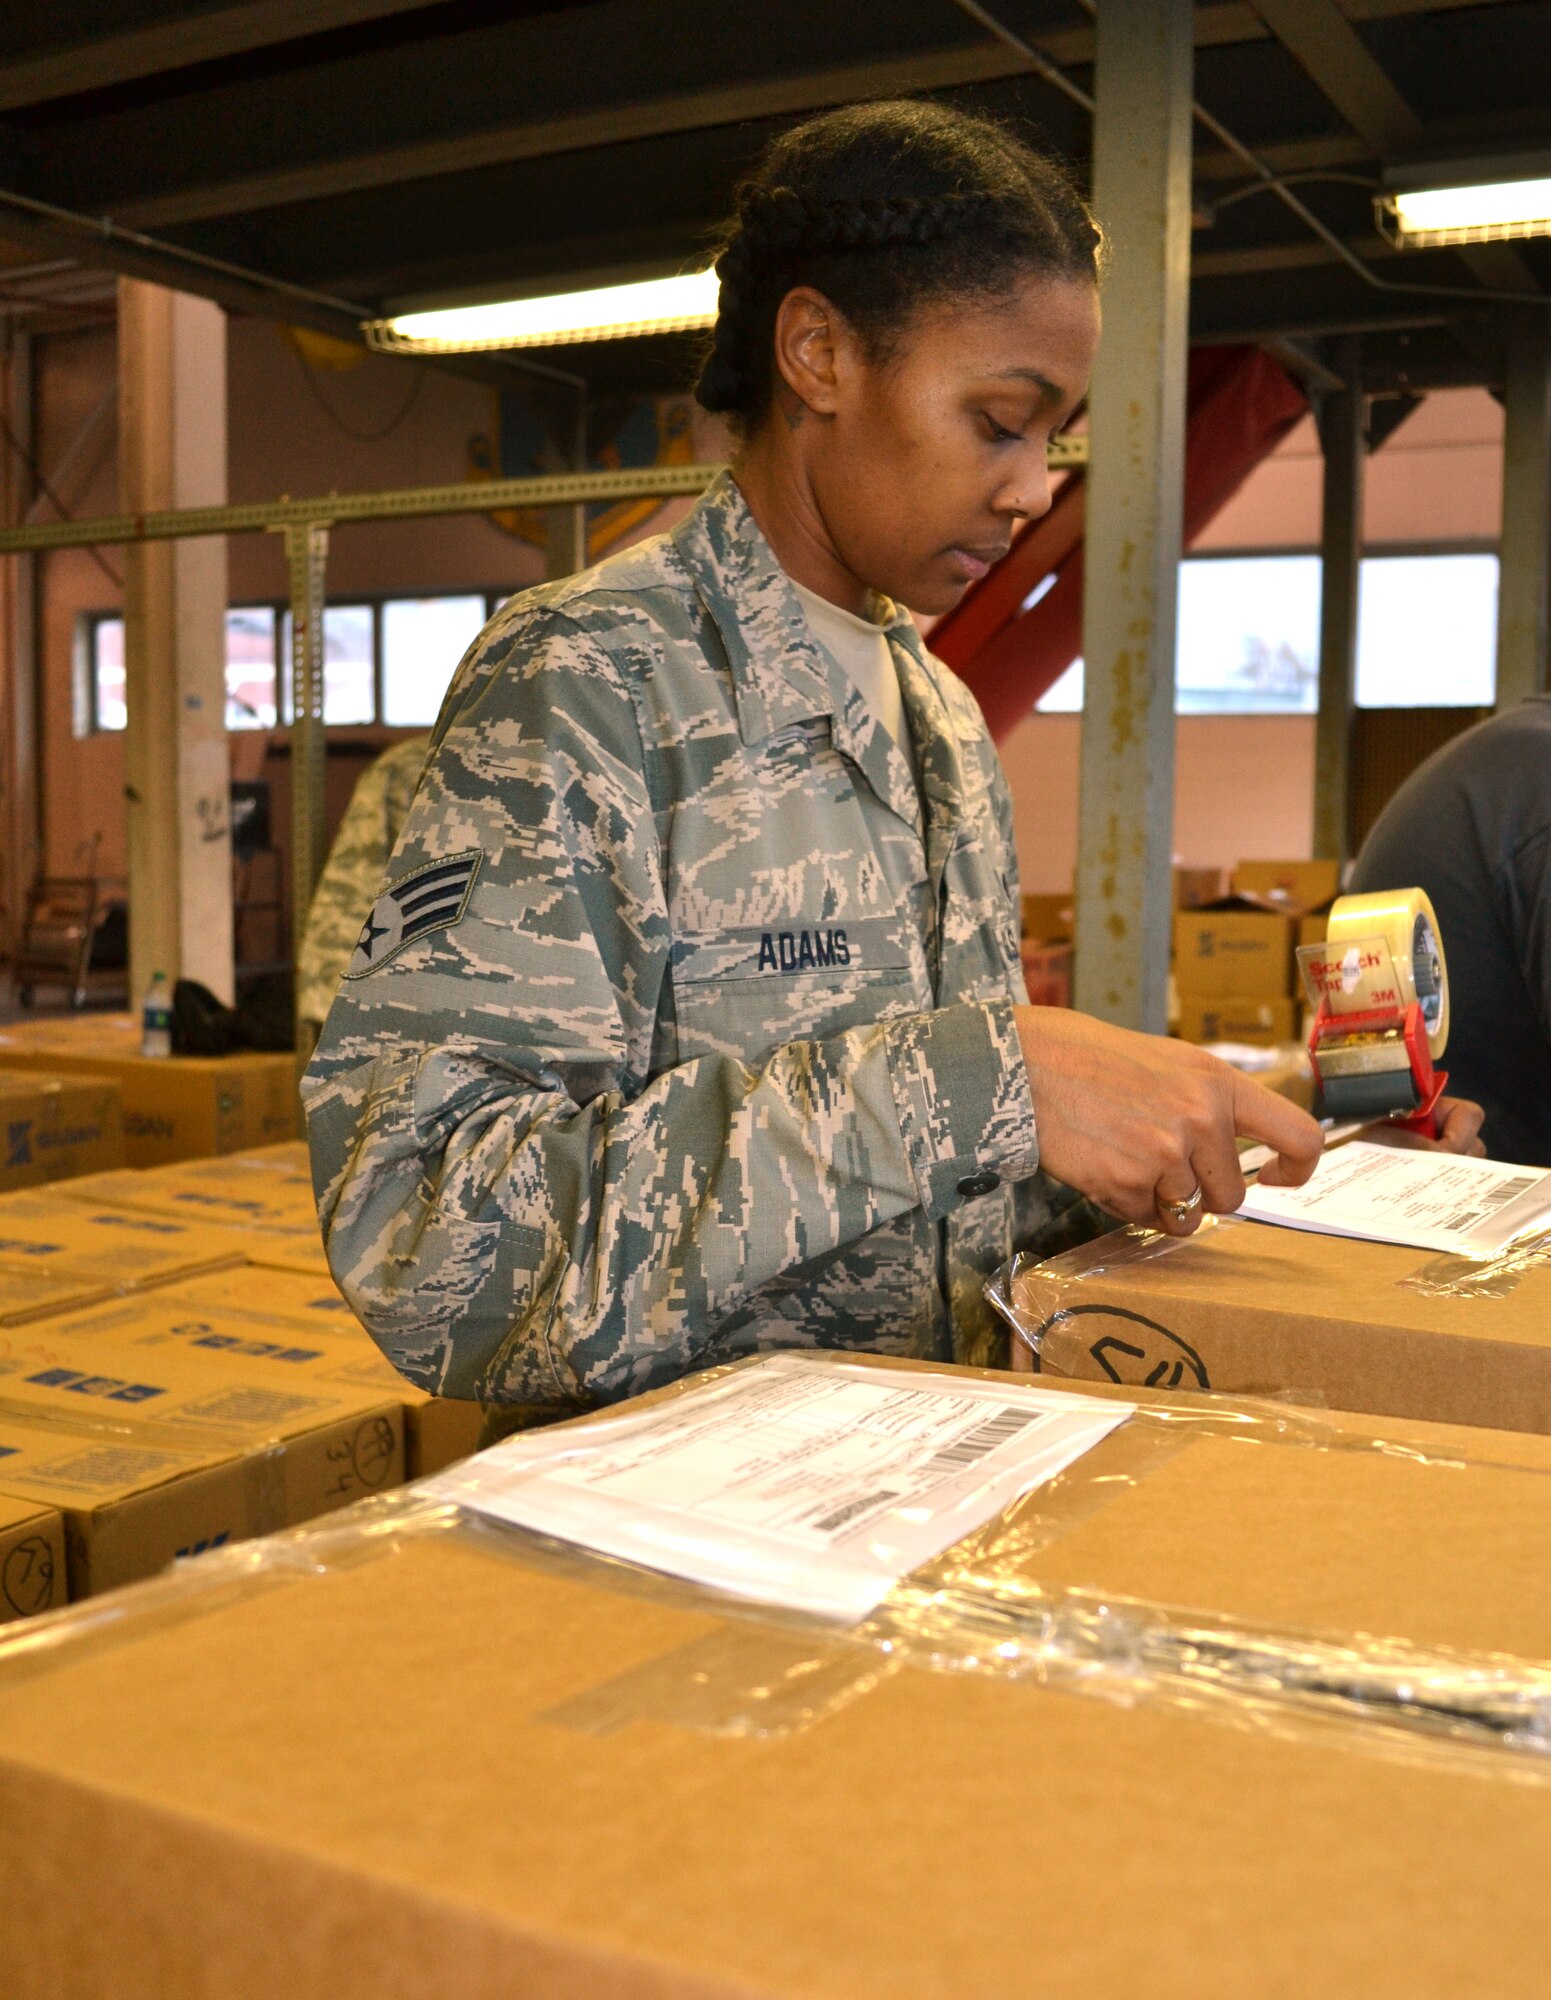 Senior Airman Charlissa Adams, 111th Services Squadron, helps tape care packages as they are being loaded to be sent out to deployed military members from Horsham Air Guard Station, Pennsylvania, Nov. 19. 2015. Approximately 5,000 packages are in the process of being shipped overseas. (U.S. Air National Guard photo by Tech. Sgt. Andria Allmond/Released)